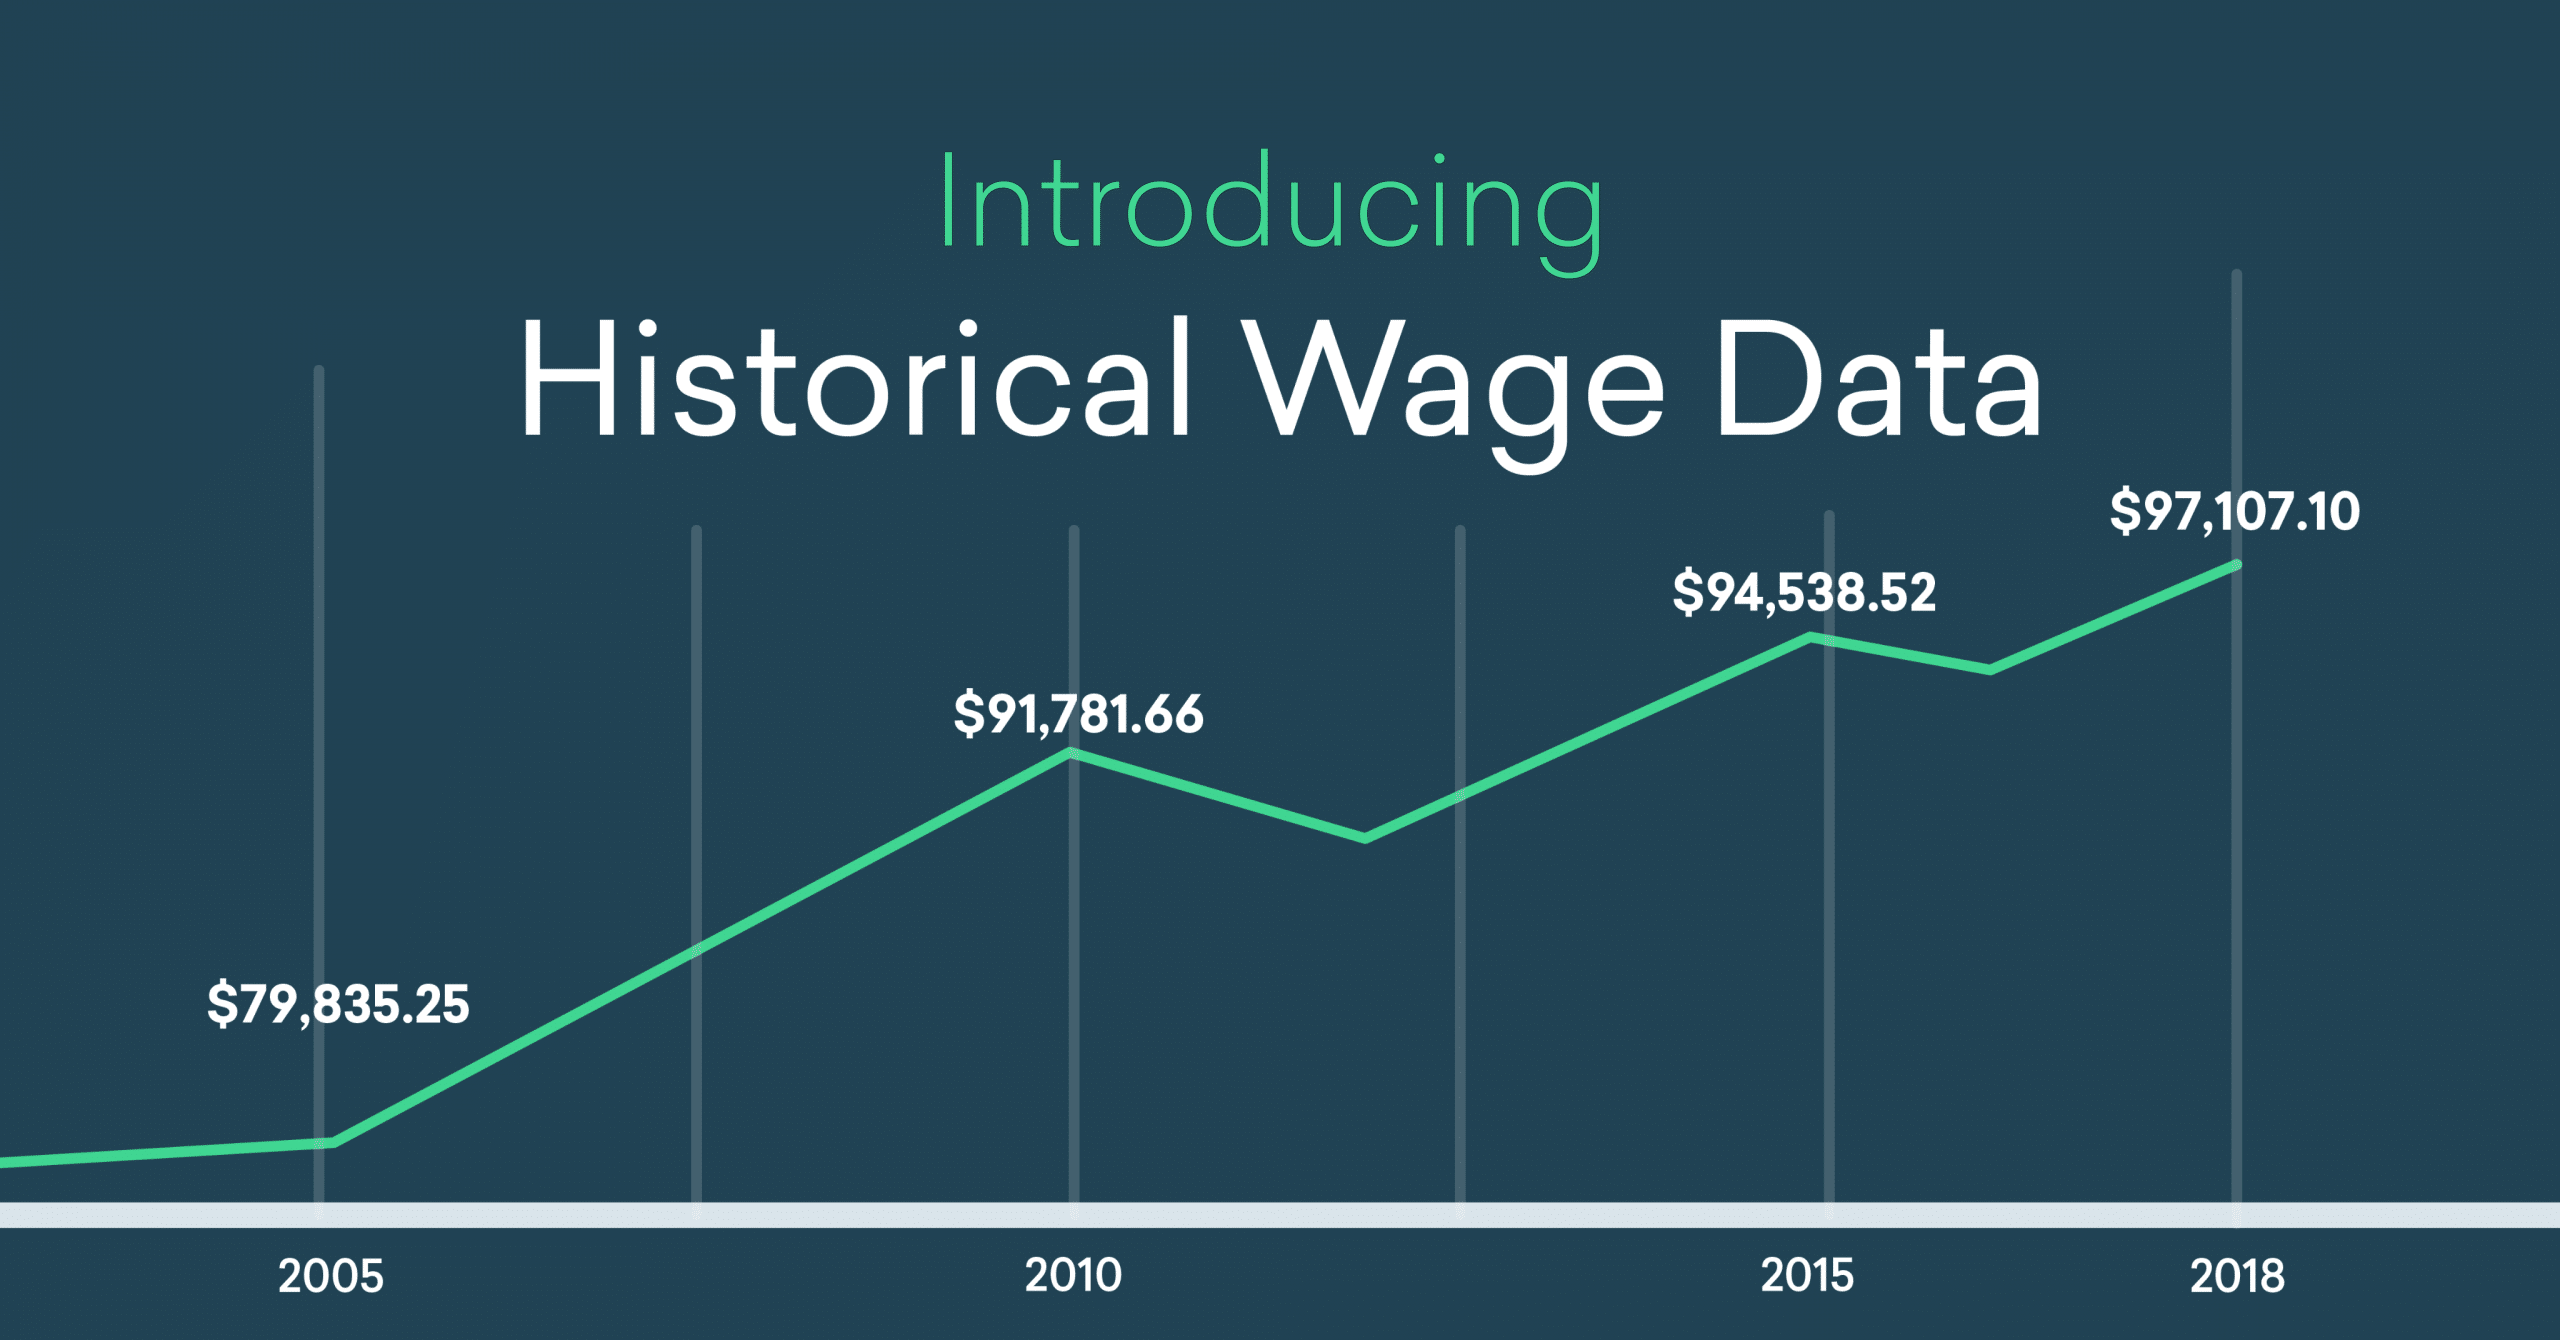 Emsi Update: Introducing Historical Wage Data